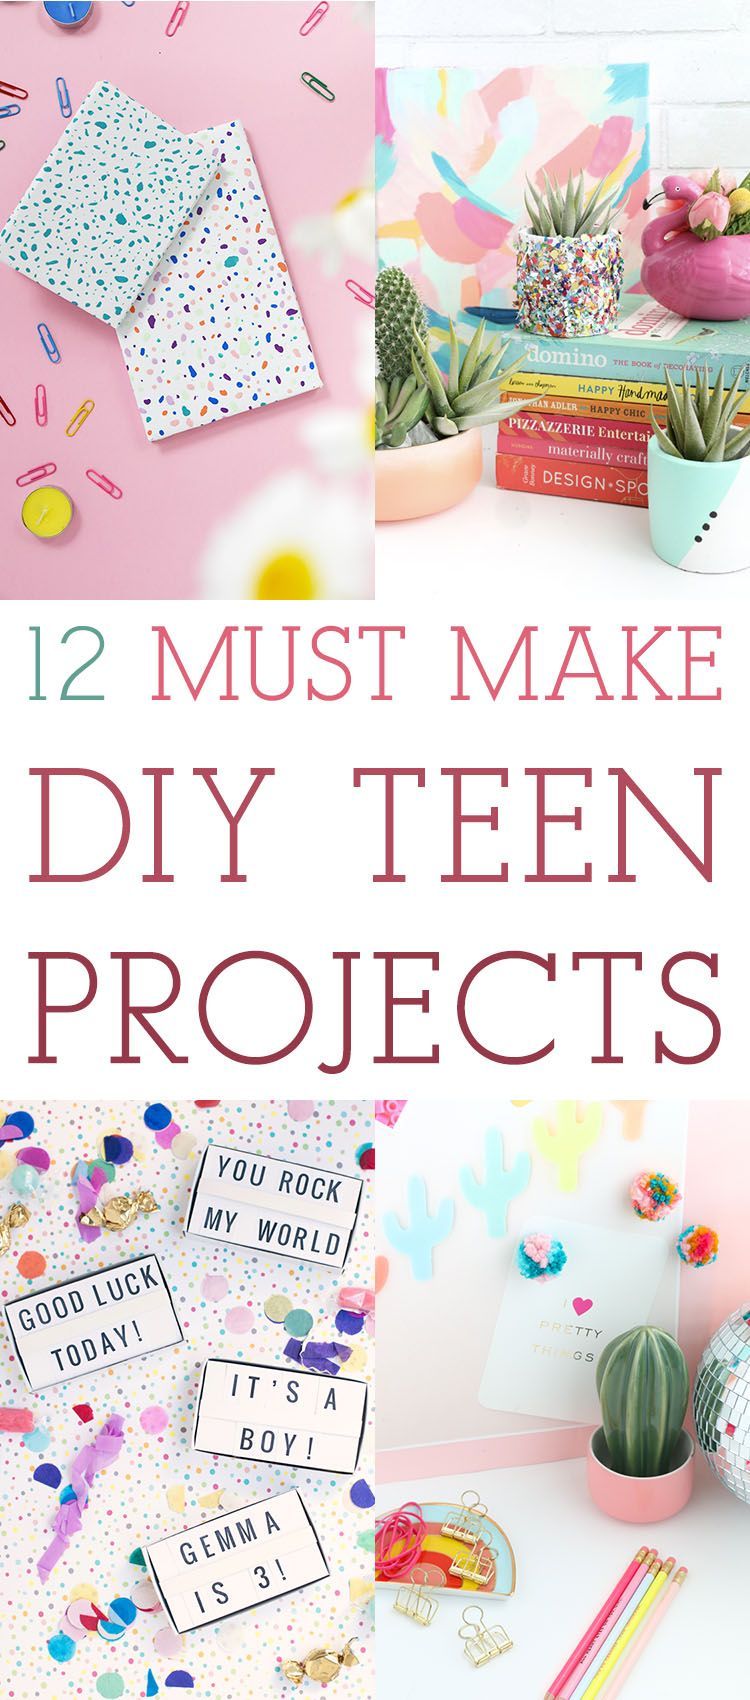 12 Must Make DIY Teen Projects! // Great for Gifts - The Cottage Market - 12 Must Make DIY Teen Projects! // Great for Gifts - The Cottage Market -   17 diy Art for teens ideas